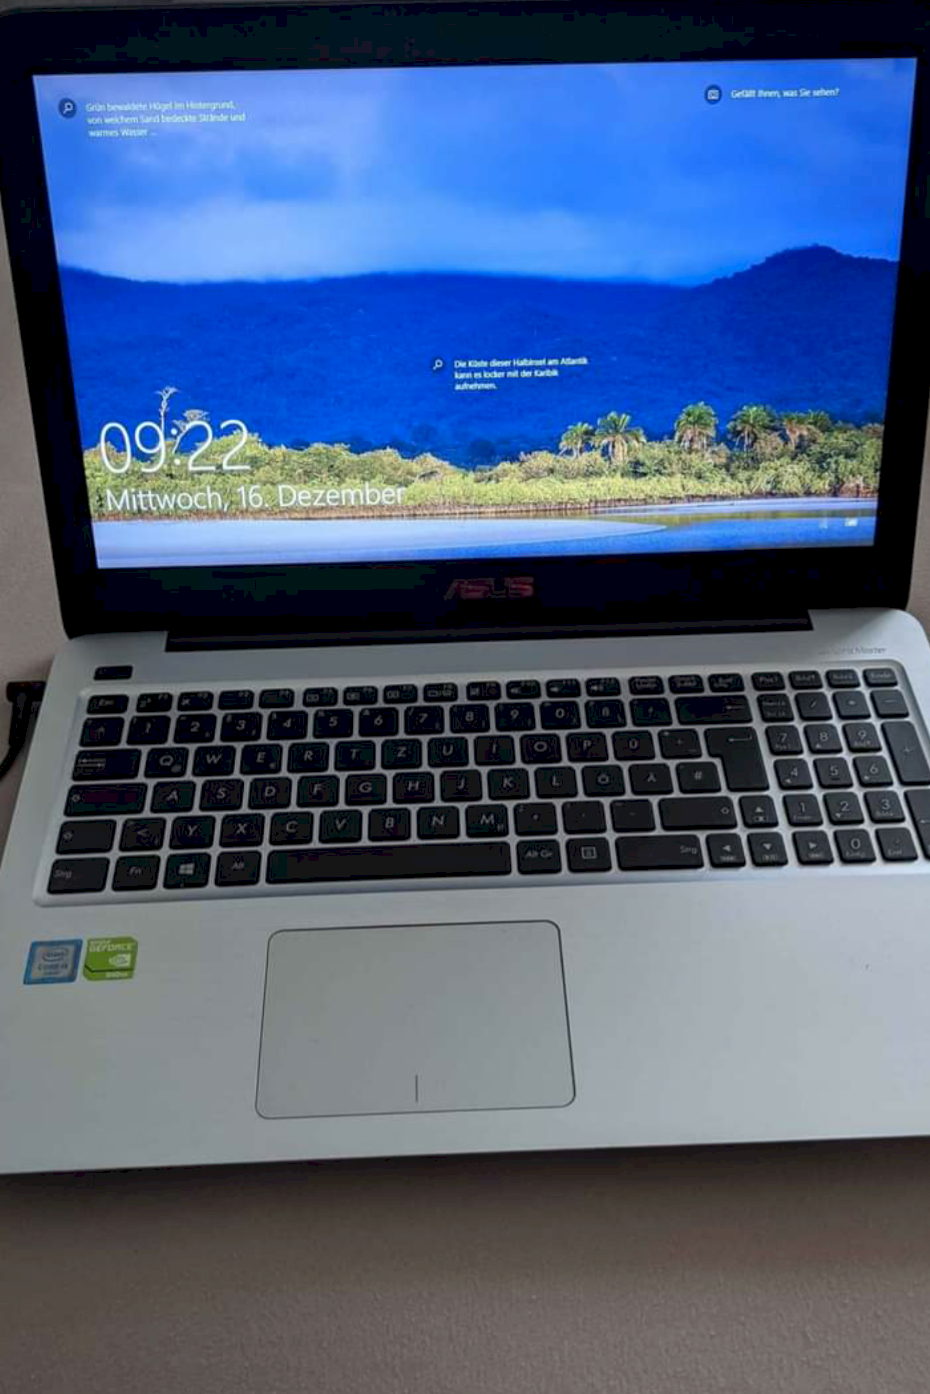 How much is this laptop worth - 1